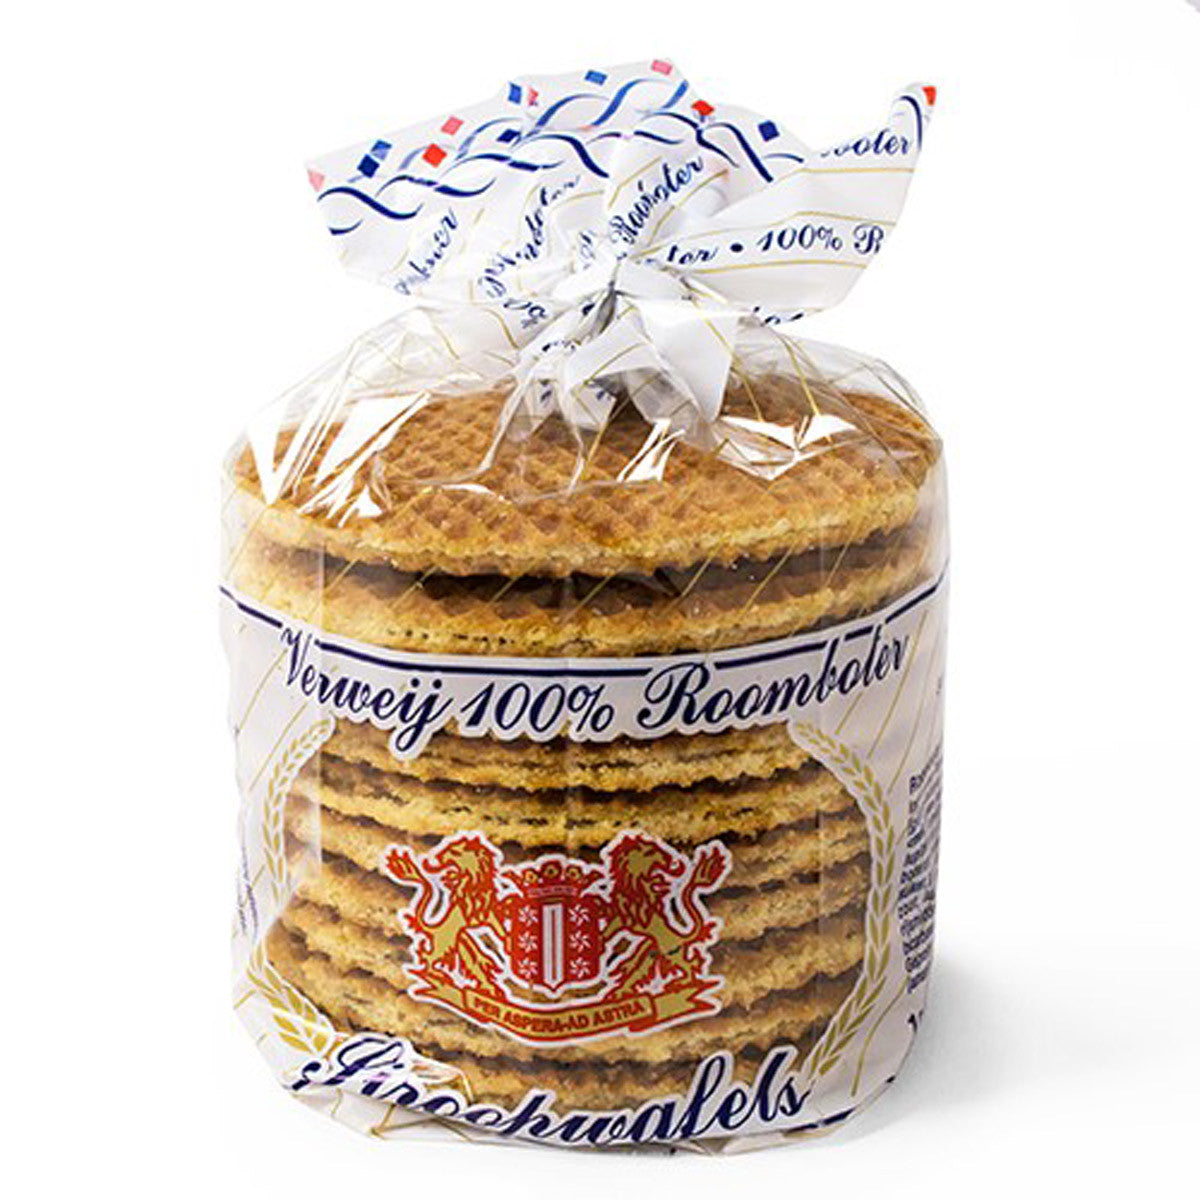 Dutch Bakery Stroopie Syrup Wafer Waffle Cookies 100% Butter